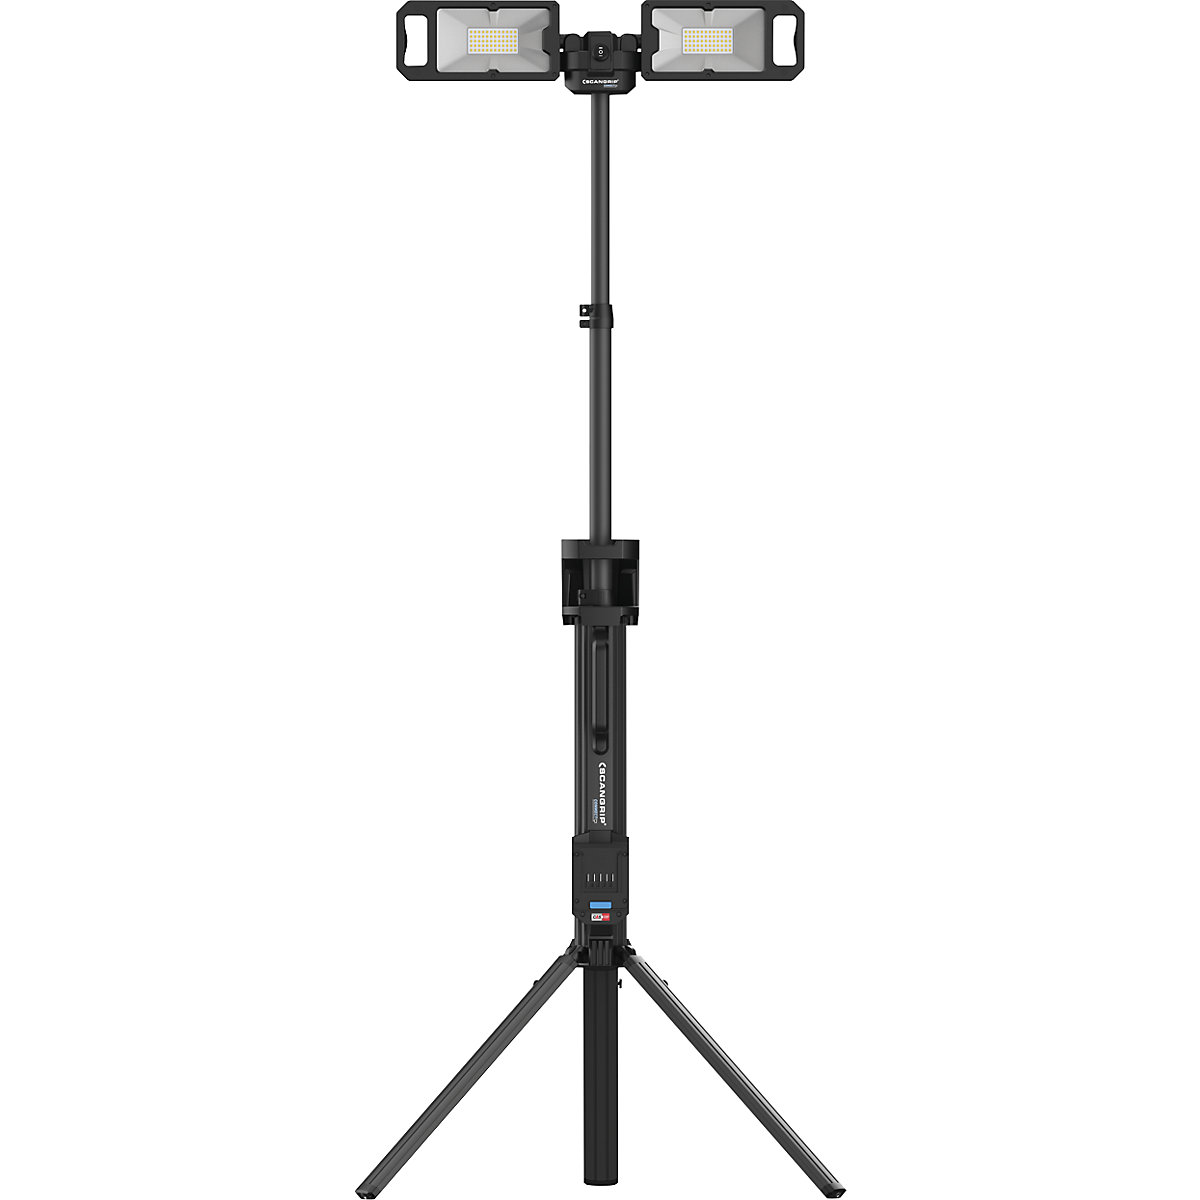 LED-bouwlamp TOWER 5 CONNECT – SCANGRIP (Productafbeelding 8)-7